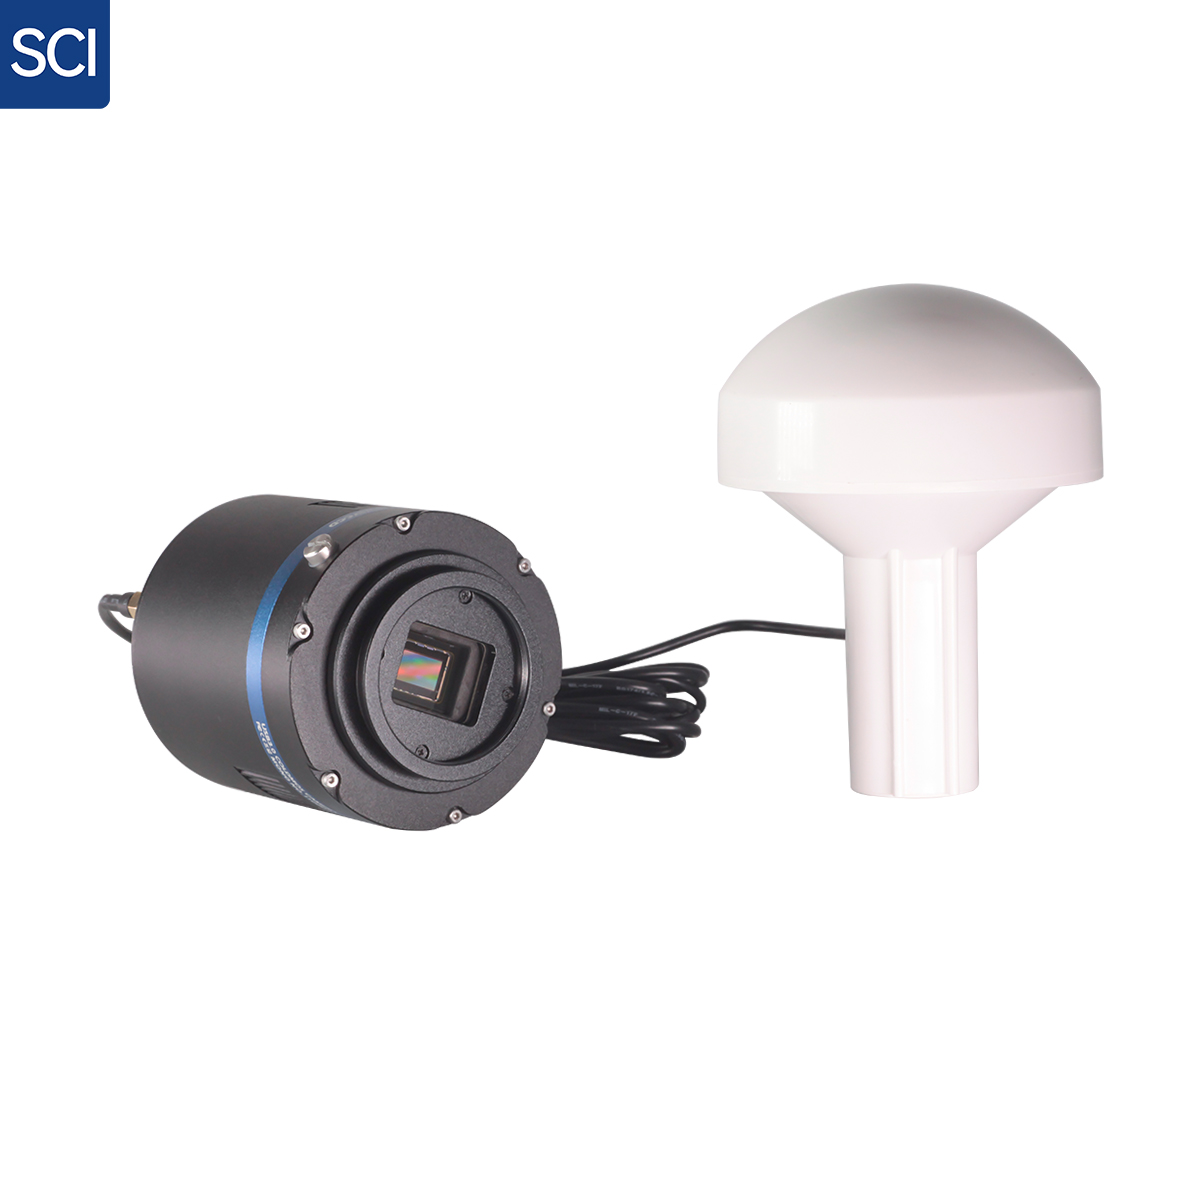 QHY174GPS IMX174 Scientific Cooling Camera